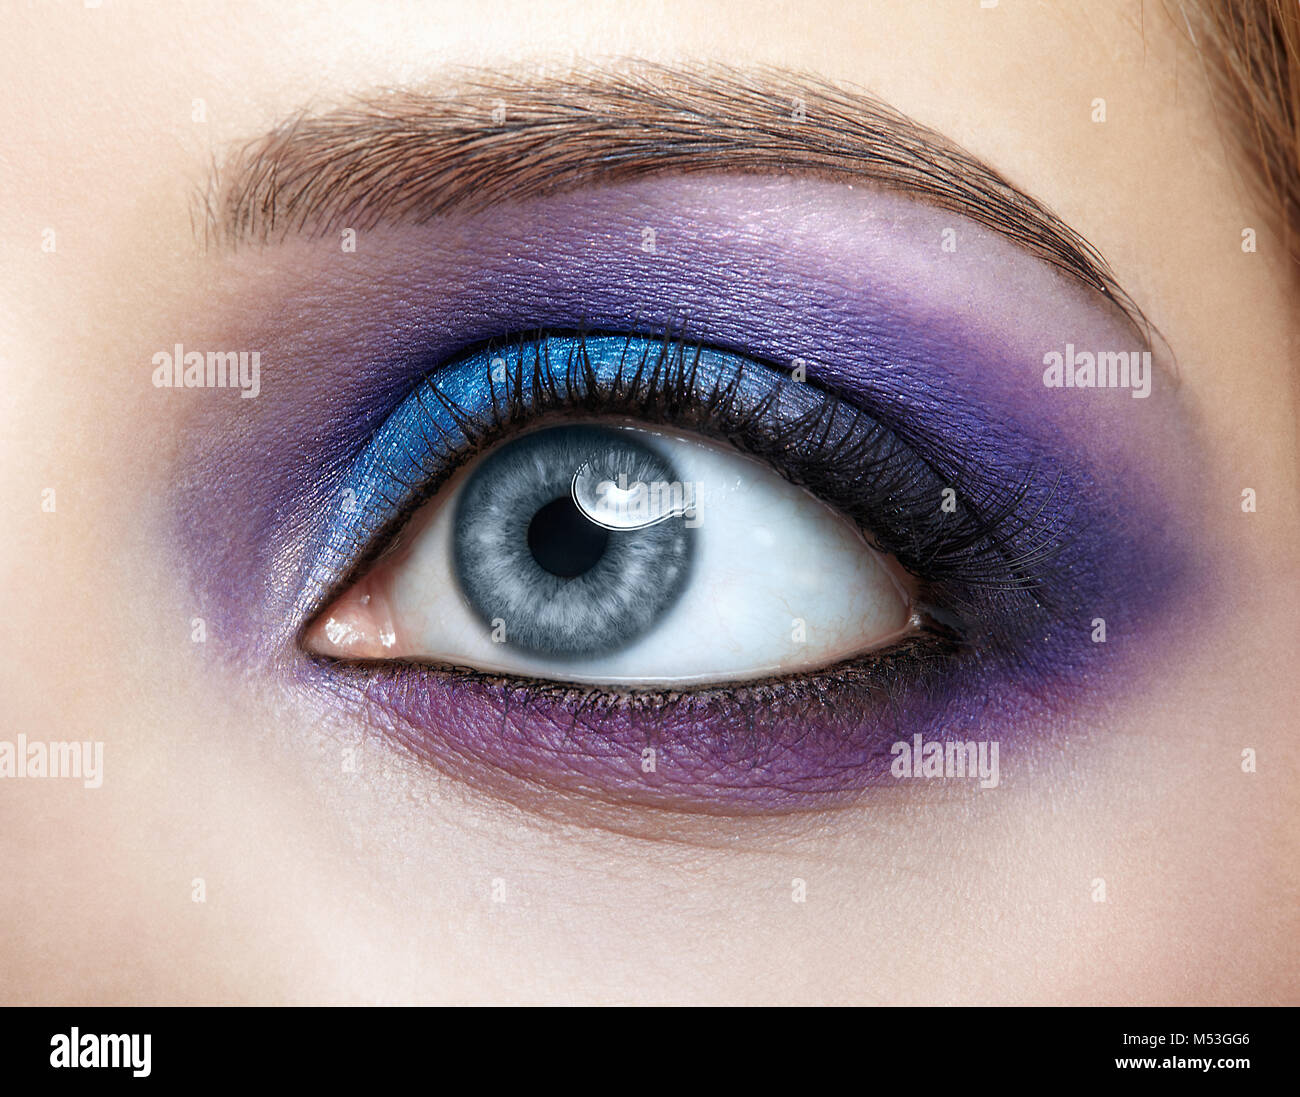 Closeup of female eye with blue and violet makeup Stock Photo